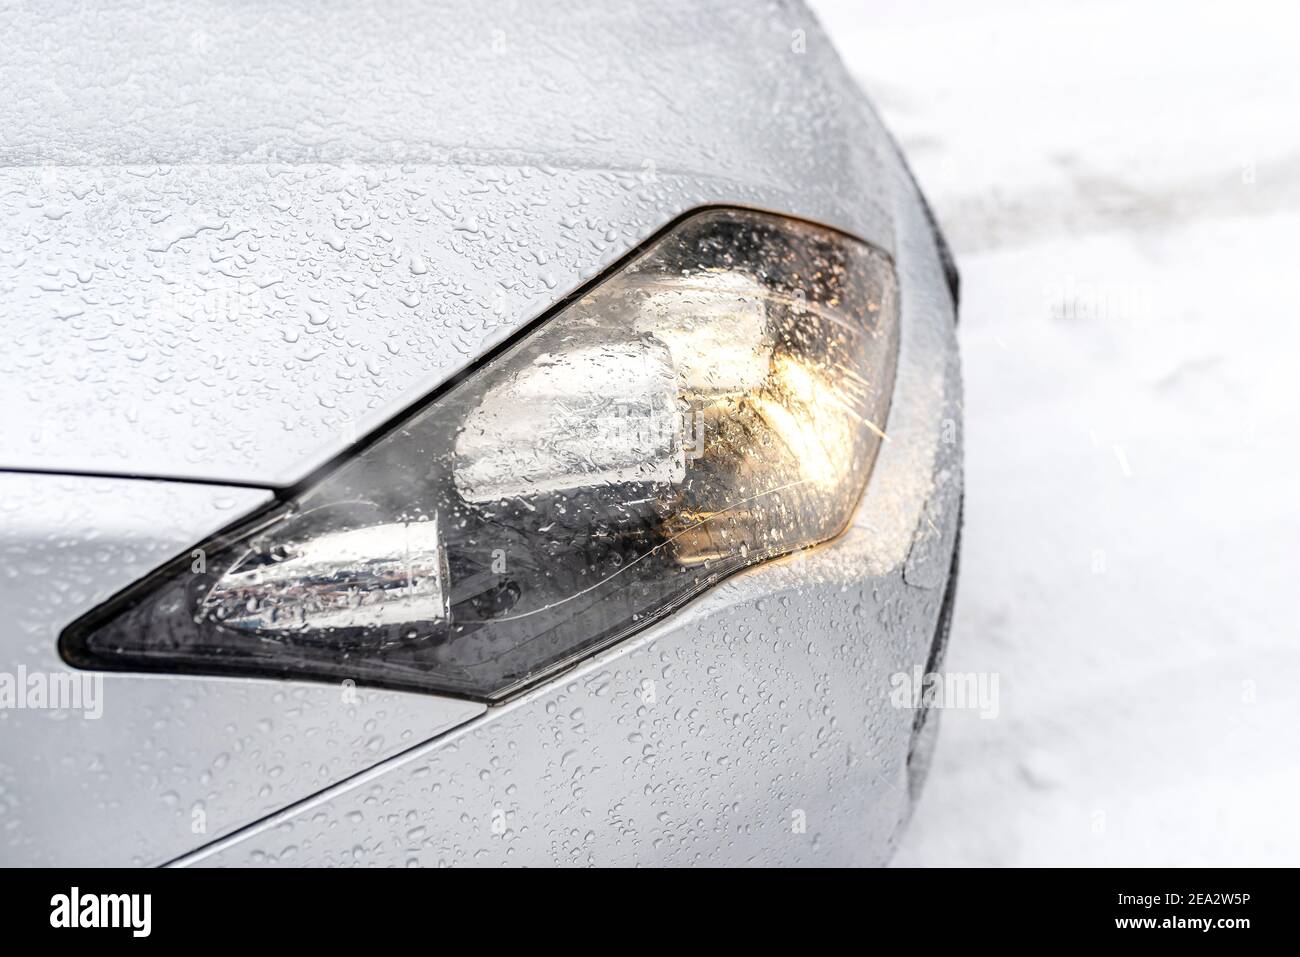 The dipped headlights on a silver car standing on a snowy road in the forest, visible snow falling. Stock Photo